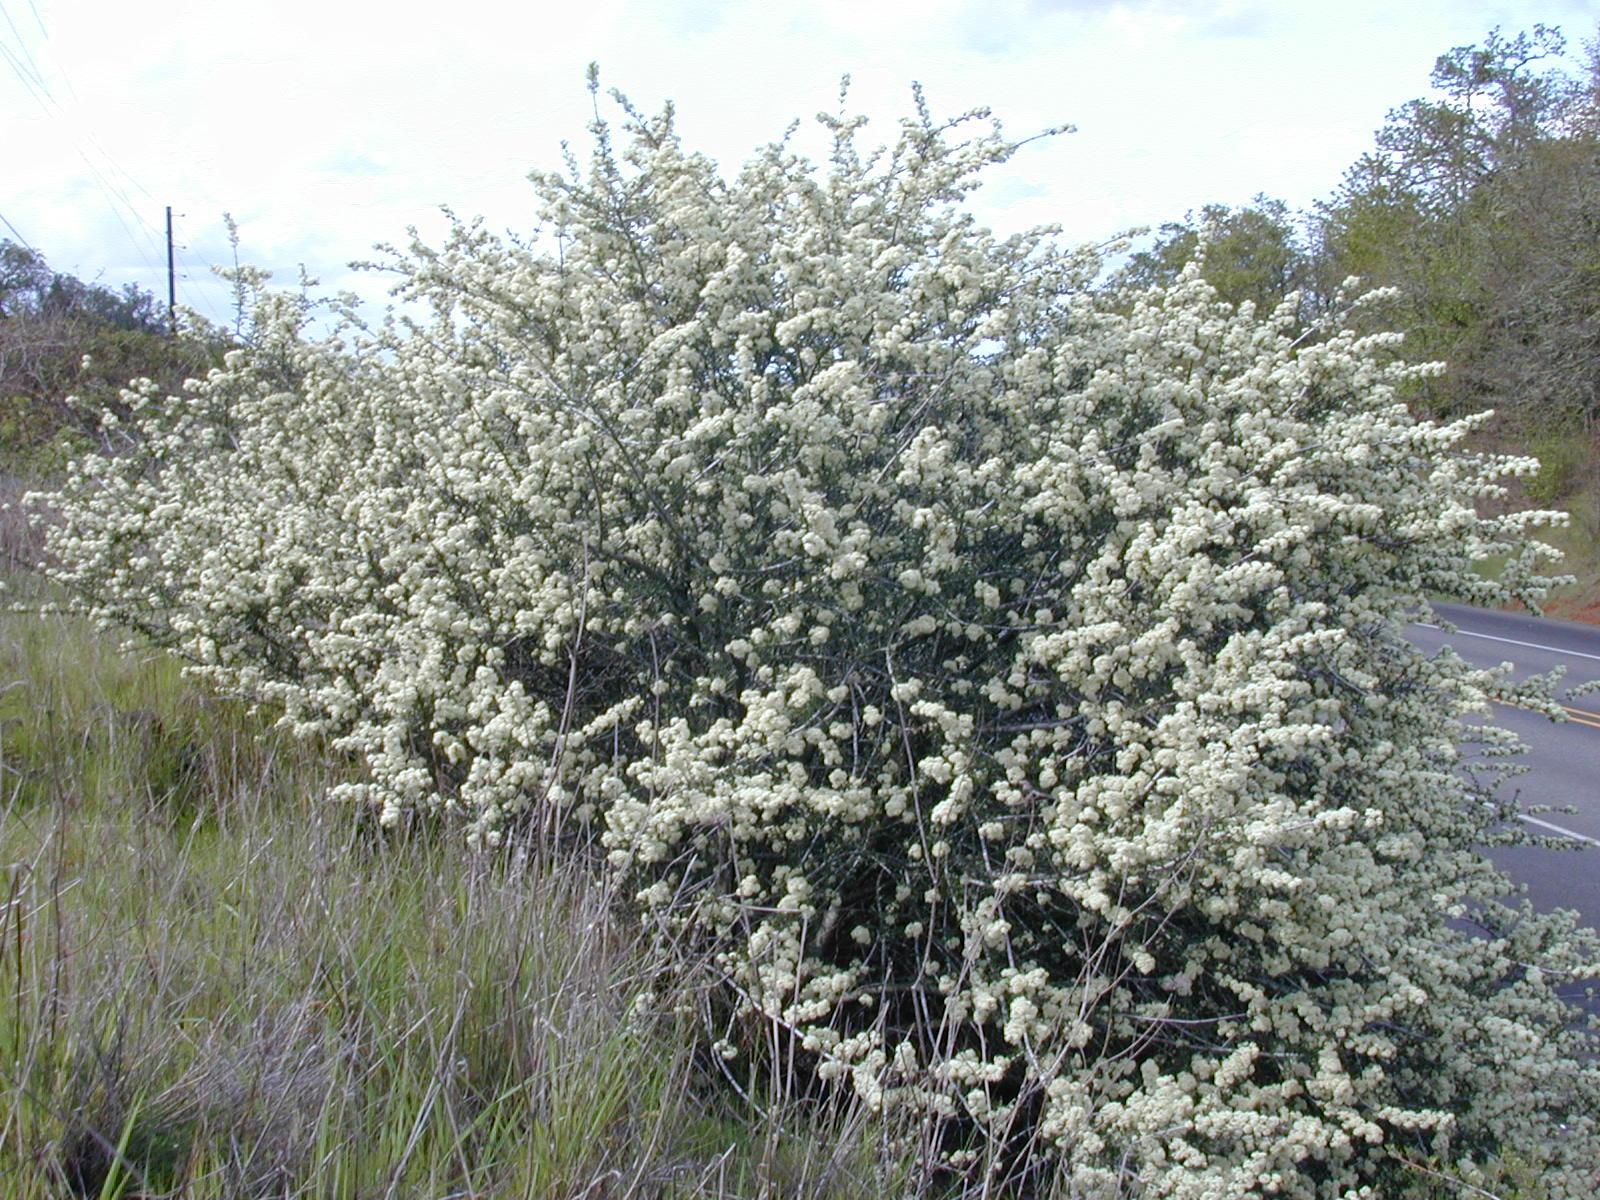 large shrub completely covered in white small flowers